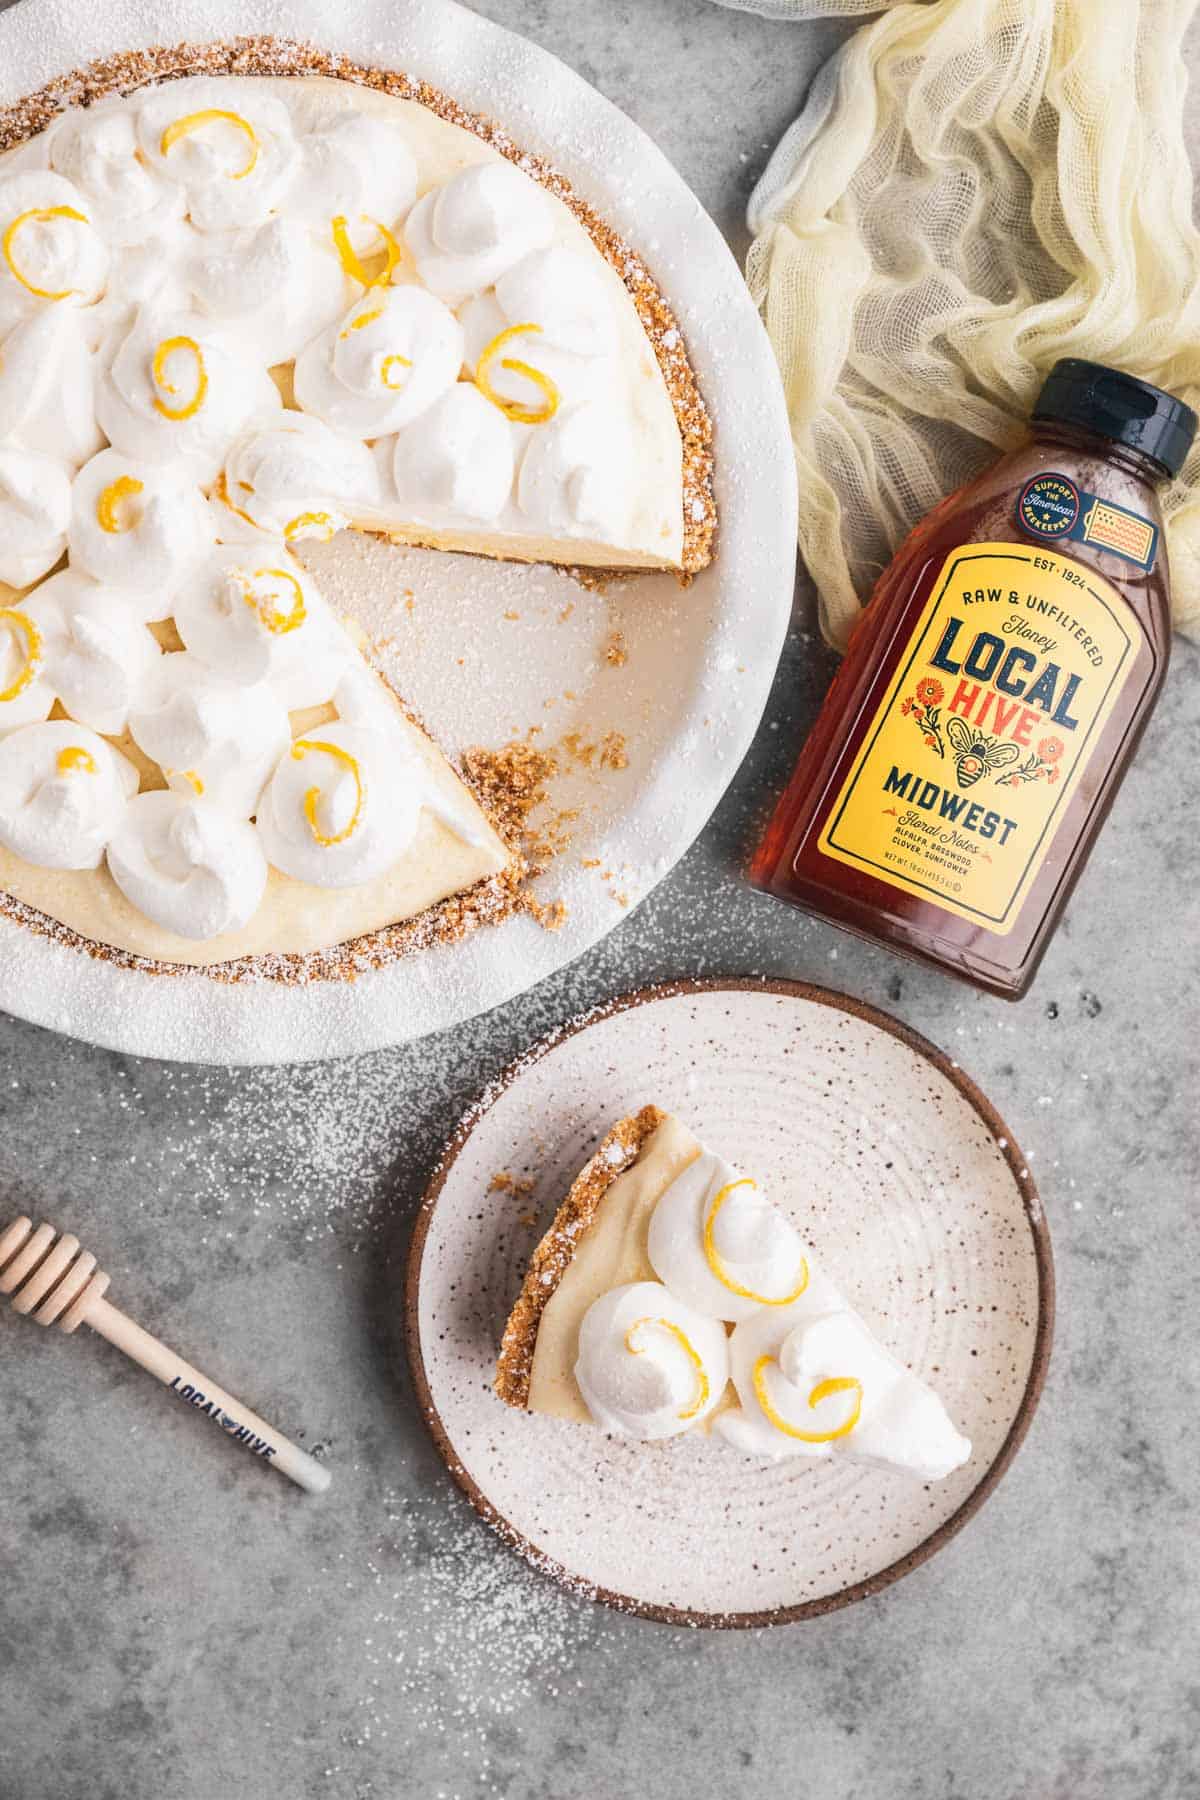 Lemon Chiffon Pie with a slice cut out and set on a plate.